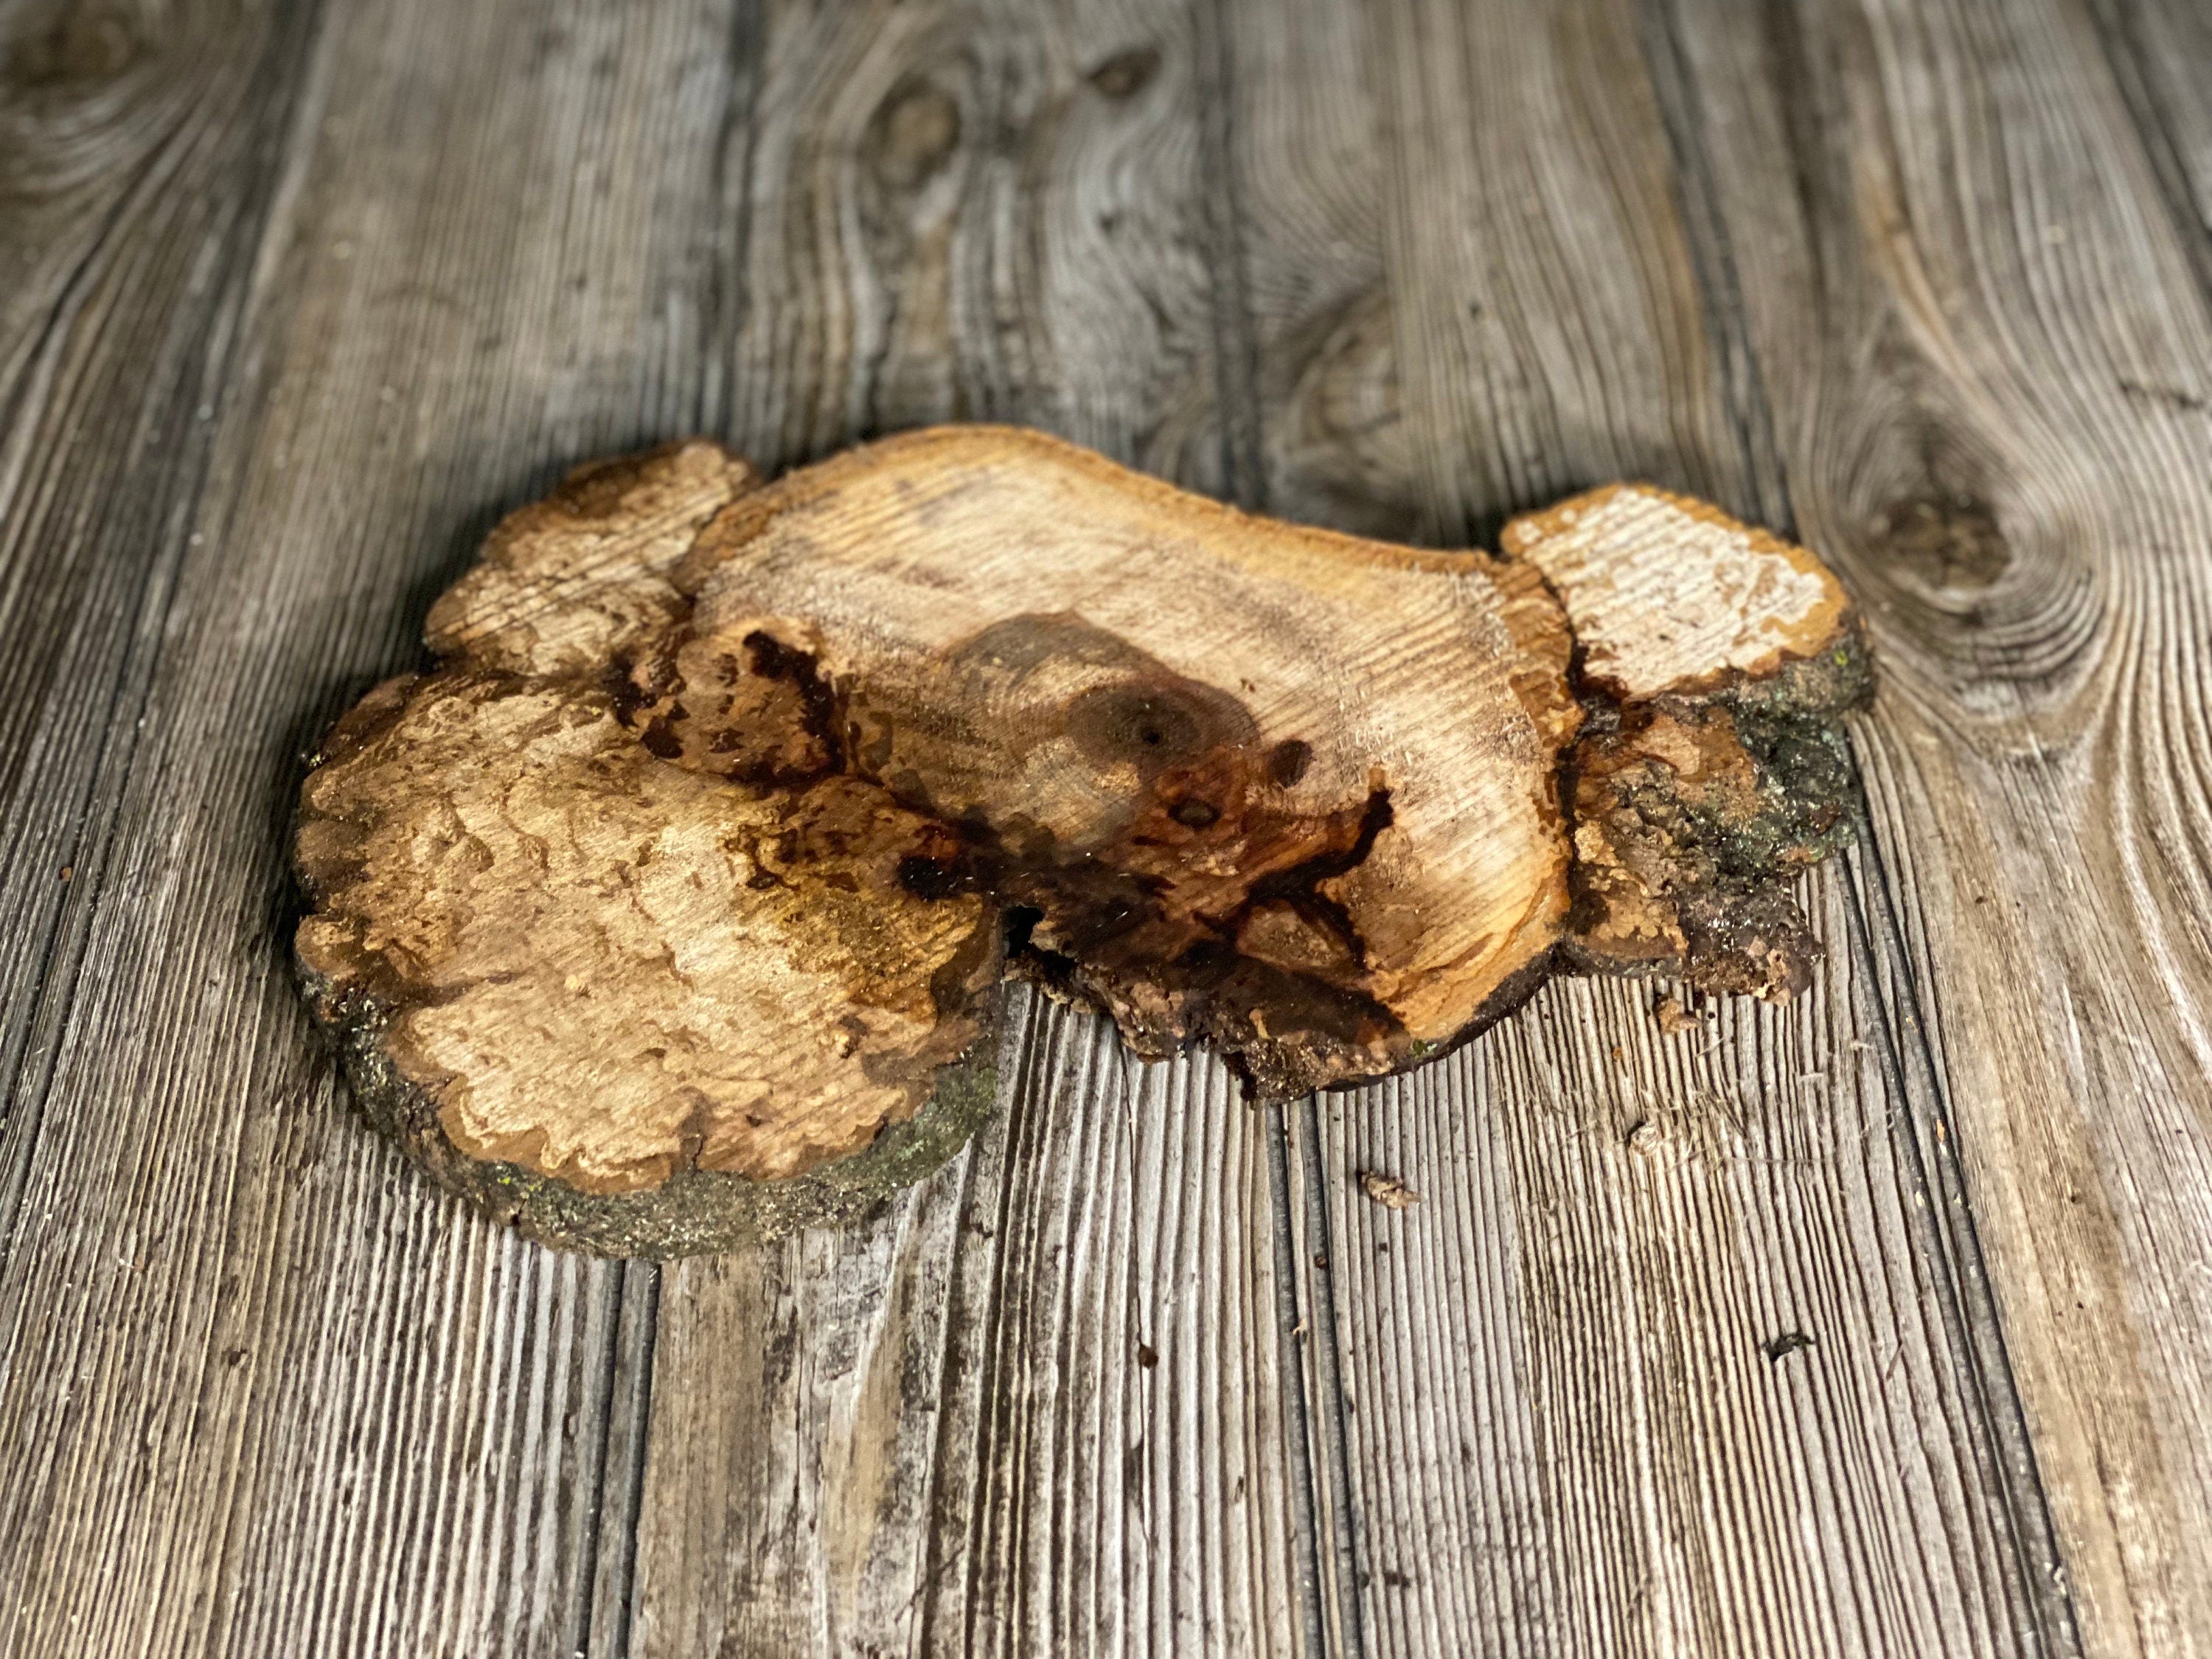 Hickory Burl Slice, Approximately 11 Inches Long by 7 Inches Wide and 3/4 Inch Thick